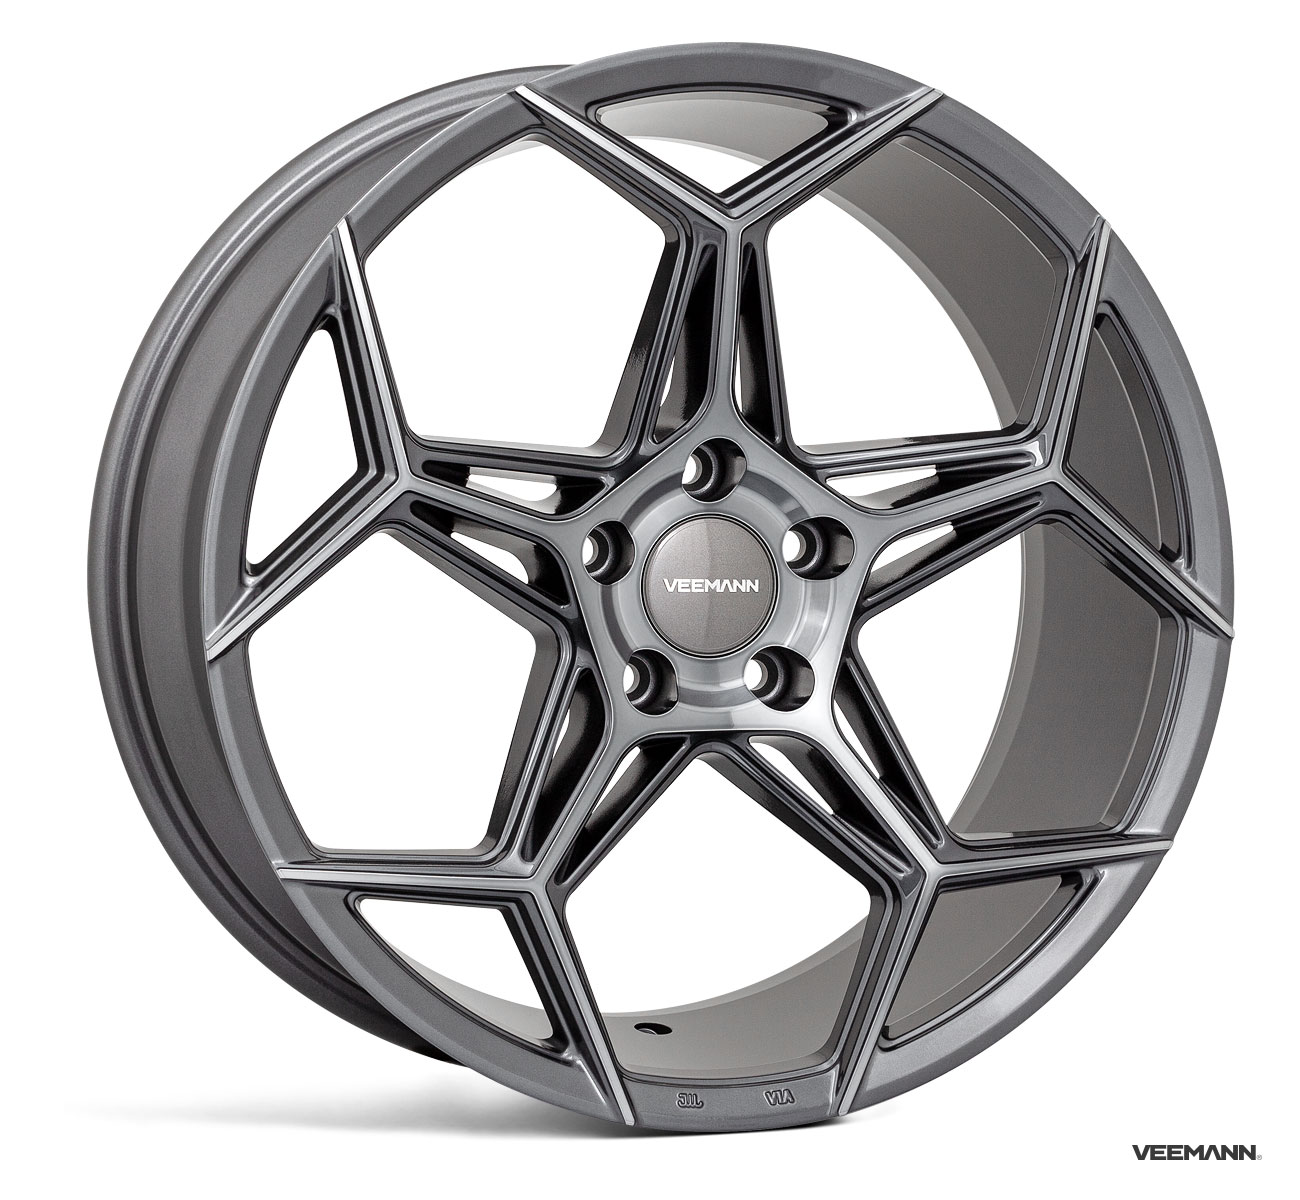 NEW 18" VEEMANN V-FS40 ALLOY WHEELS IN GRAPHITE SMOKE MACHINED WITH WIDER 9" REARS